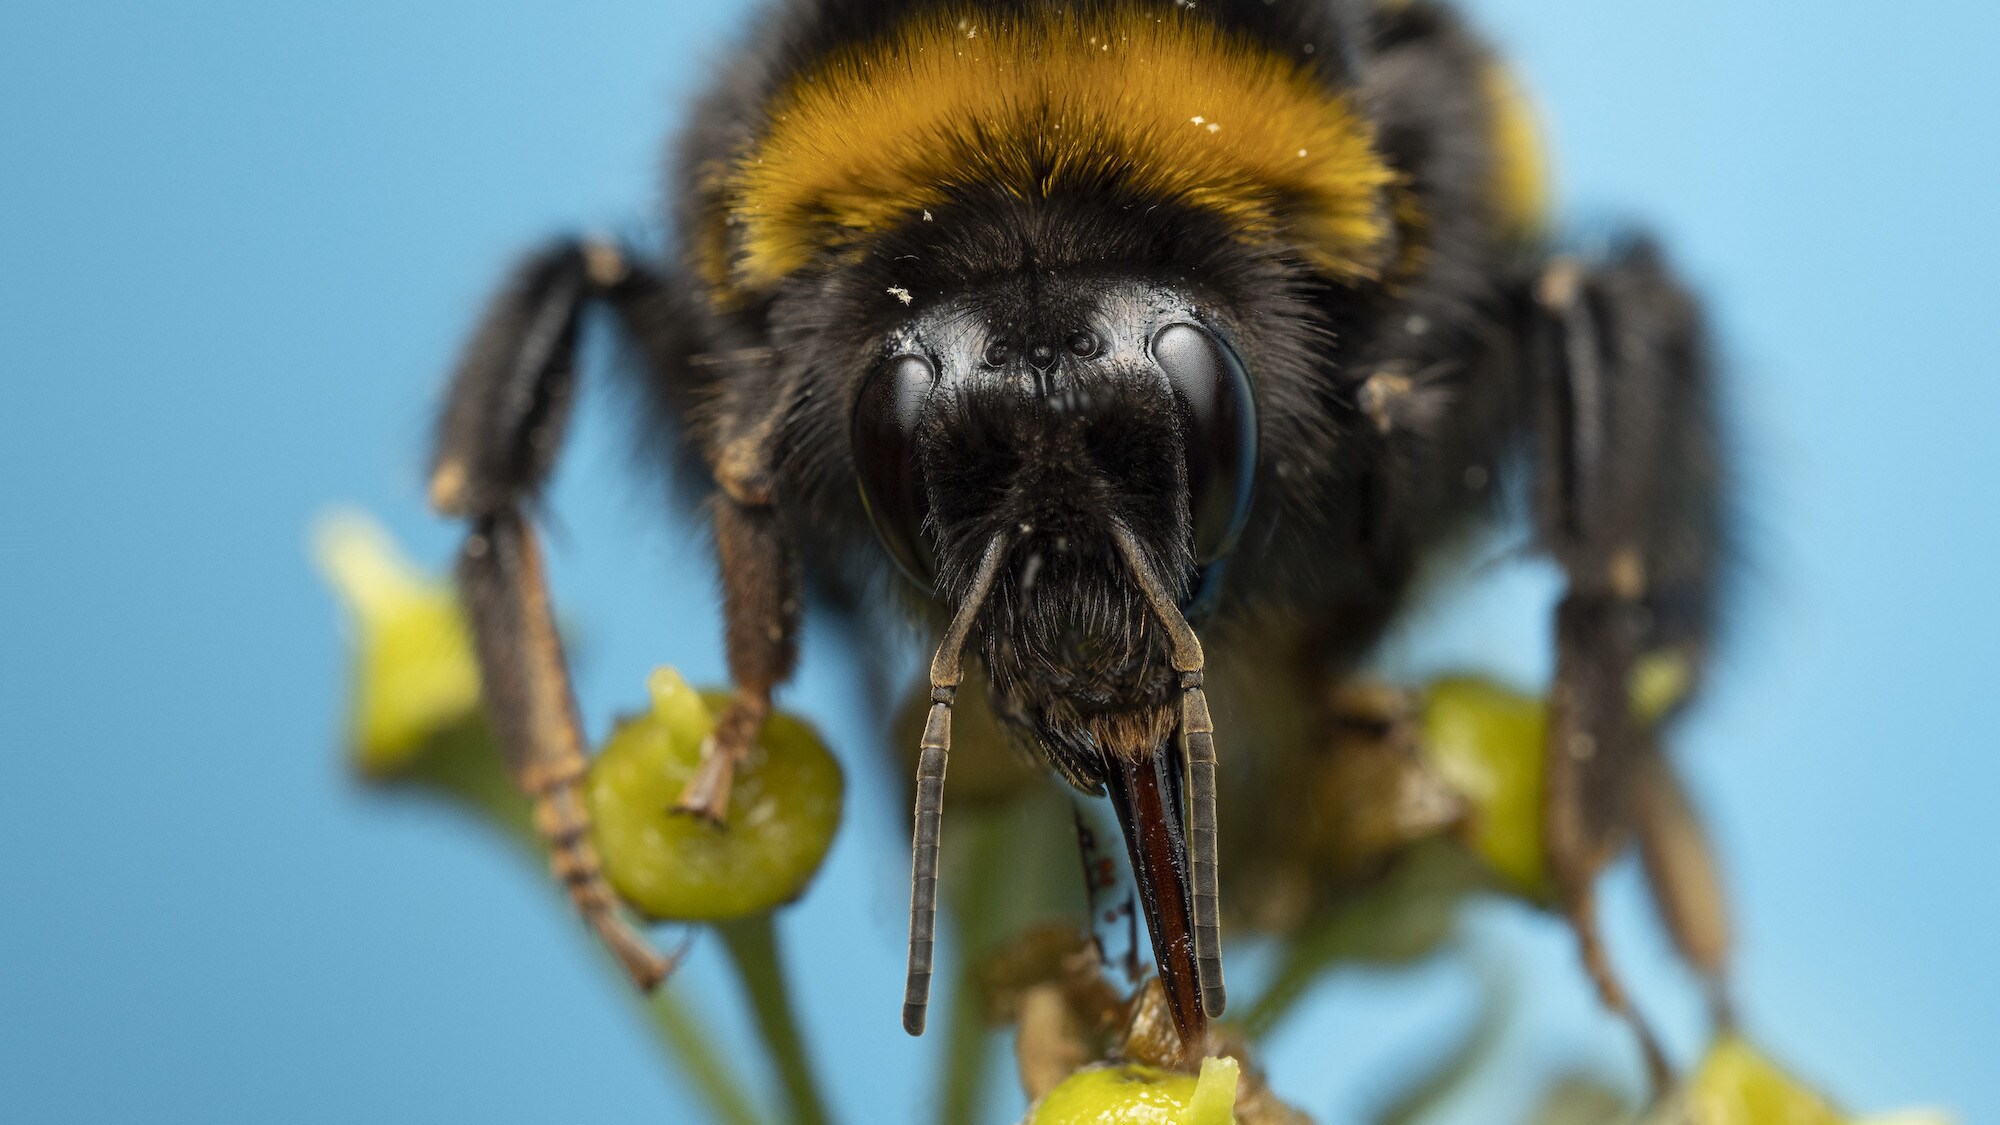 A buff tailed bumblebee with its proboscis out on a green plant is featured in "The Busy Farm" episode of "A Real Bug's Life." (National Geographic/Jamie Thorpe)